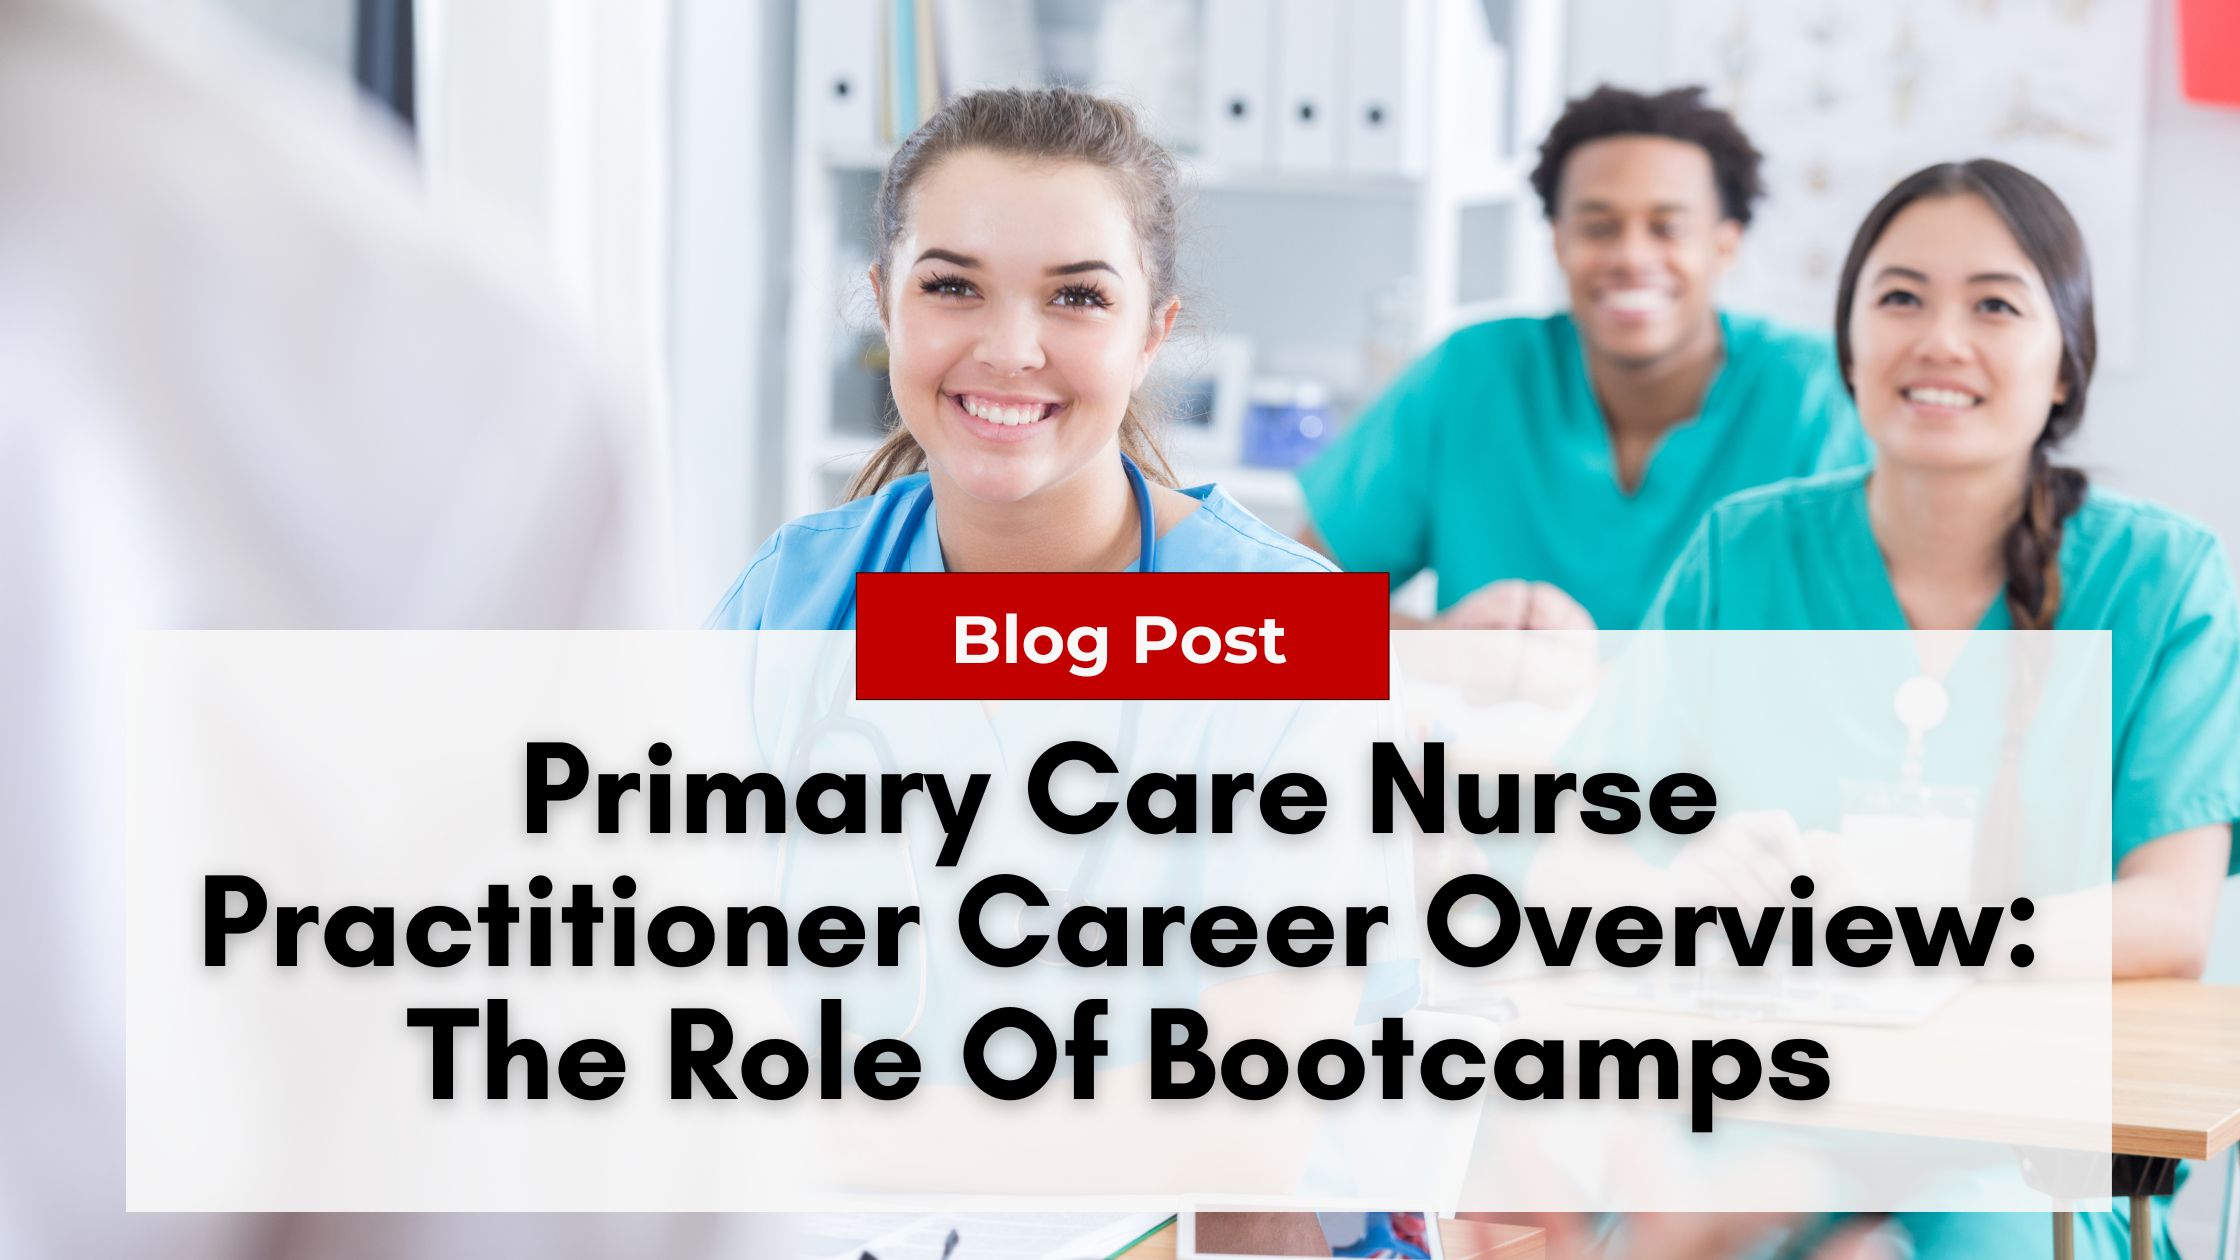 A group of healthcare professionals, including a smiling woman in scrubs, sit in a classroom setting. A text overlay reads: "Blog Post - Primary Care Nurse Practitioner Career Overview: The Role Of Bootcamps and Managing Nurse Practitioner Burnout.